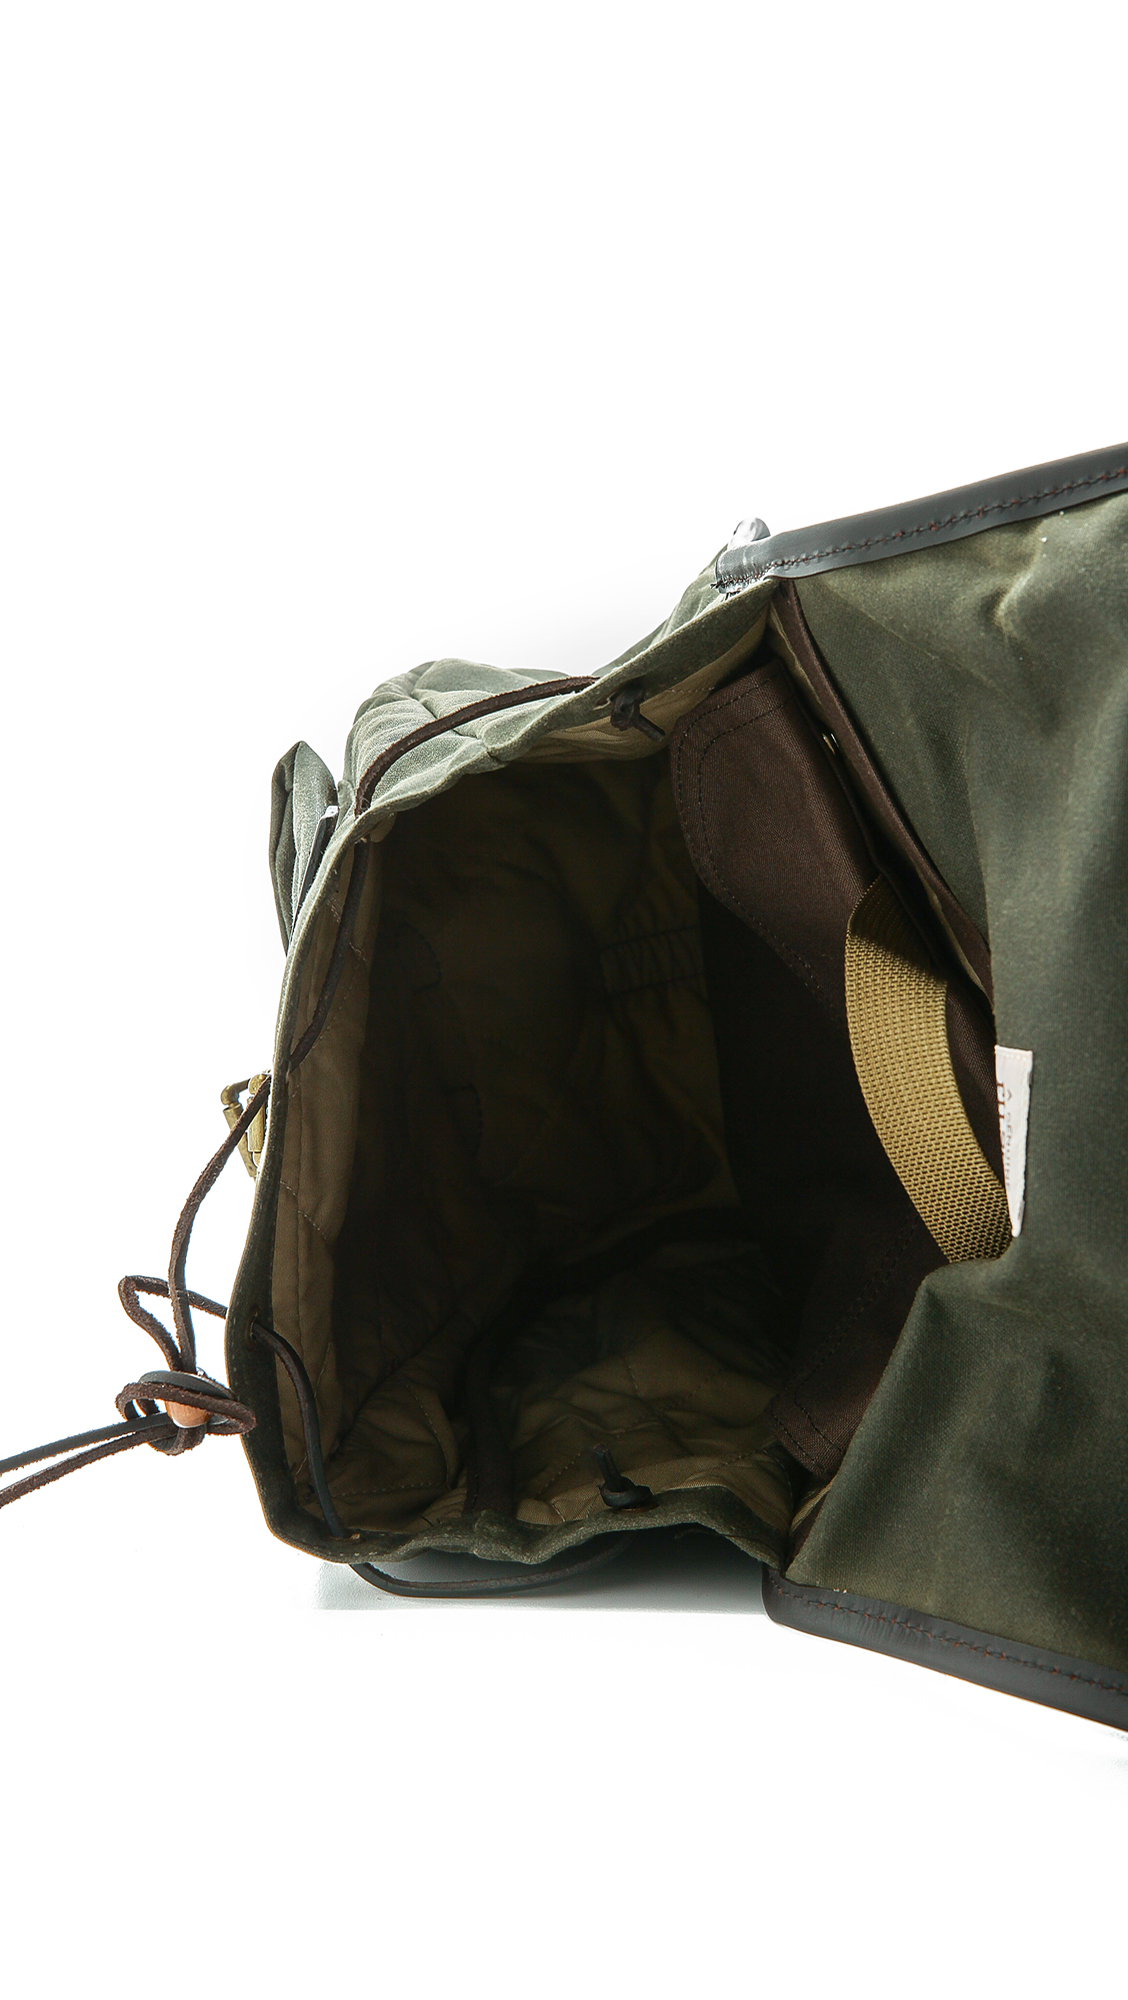 Filson Tin Cloth Backpack in Green for Men - Lyst